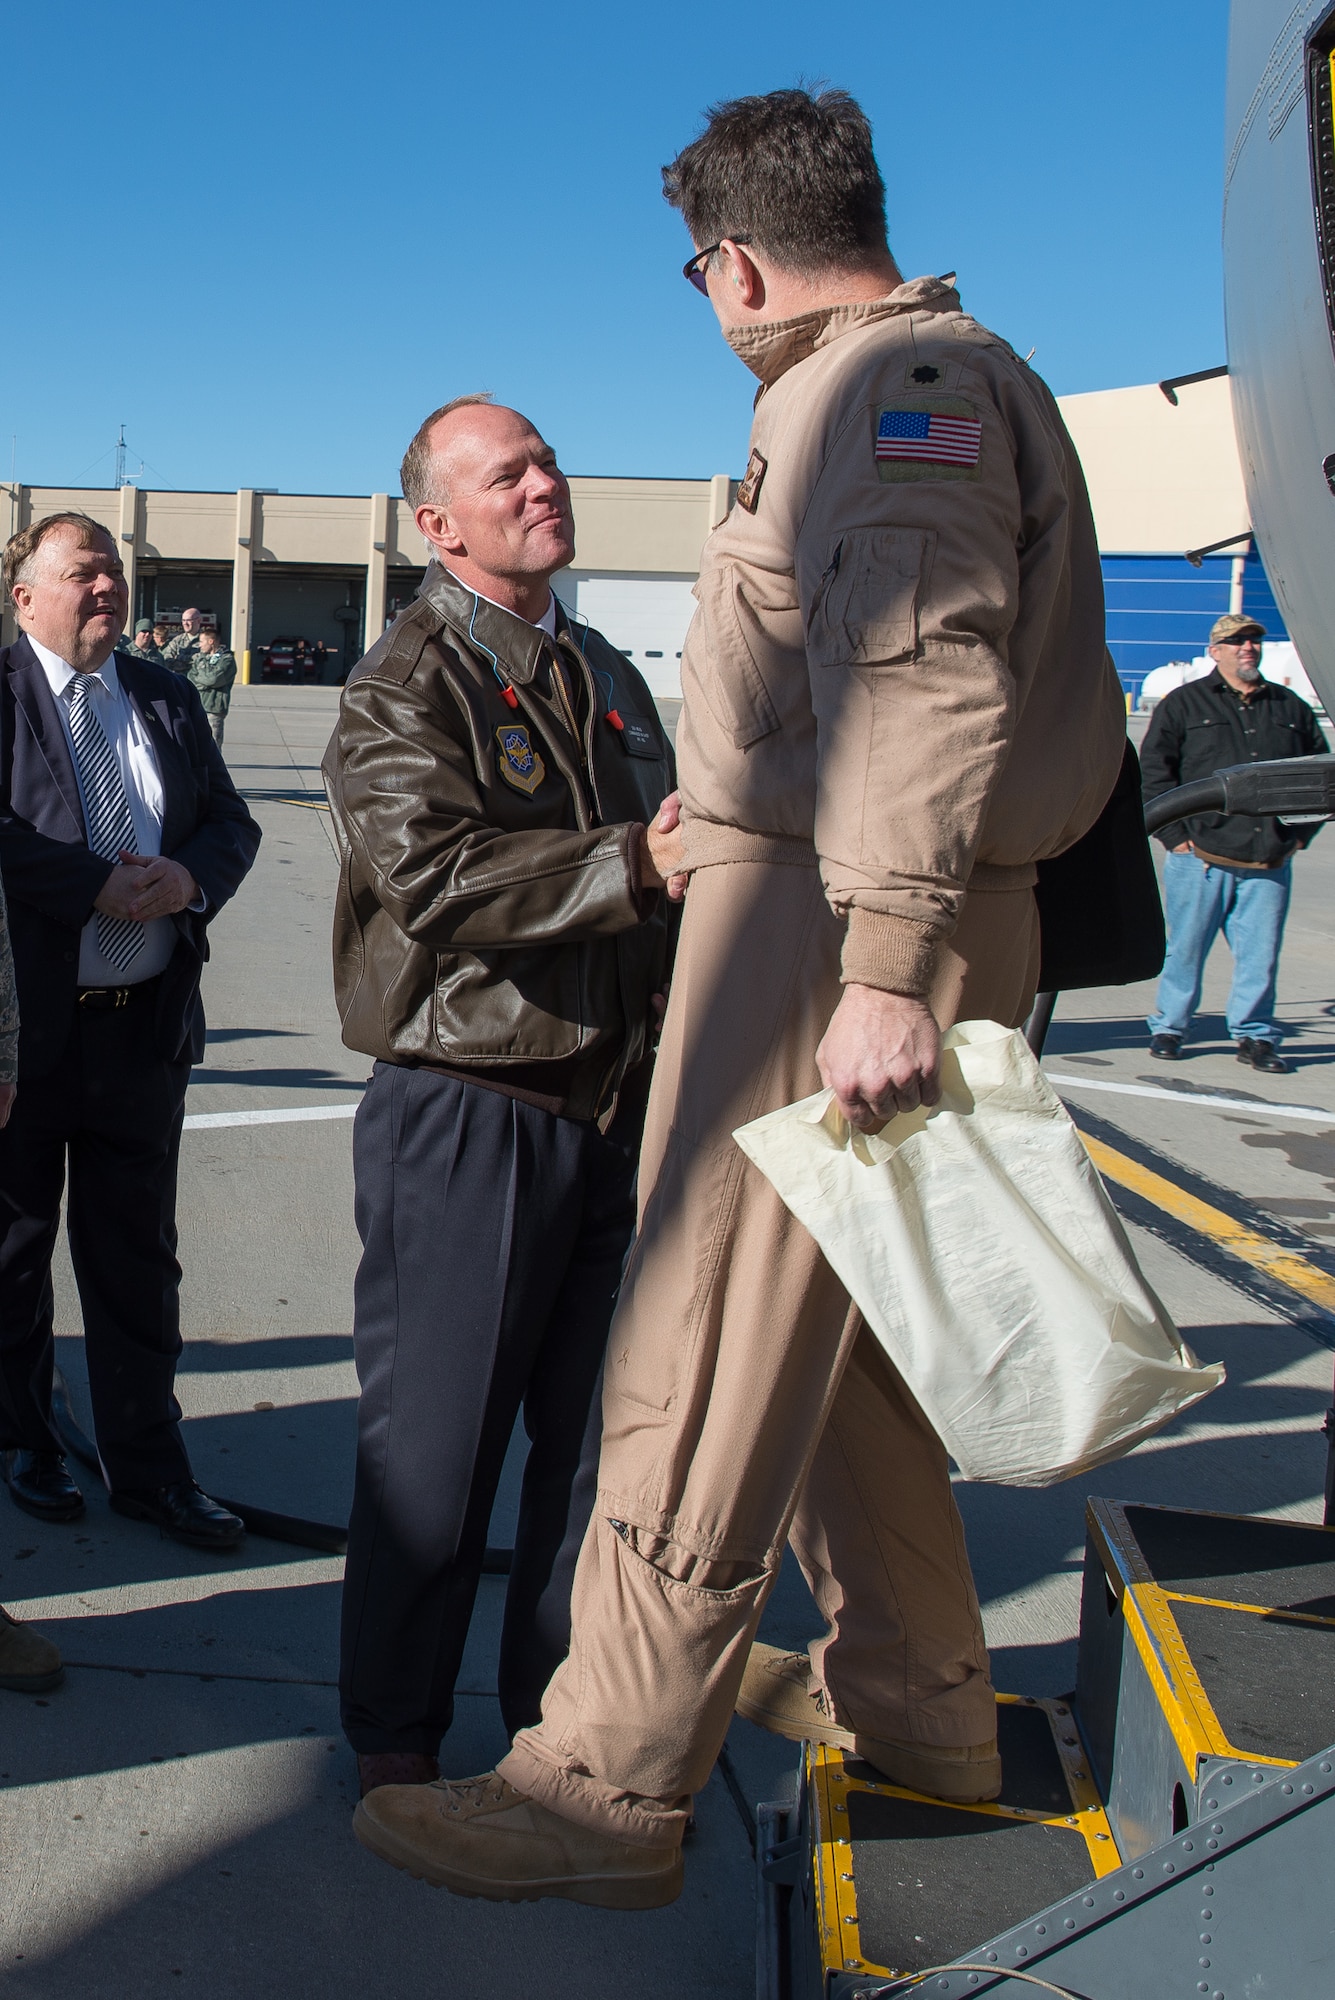 Wyoming Governor Matt Mead welcomes home Lt. Col. Mark Schmidt Jan. 8, 2015 at Cheyenne Air National Guard Base in Cheyenne, Wyoming. Around 60 members of the 153rd Airlift Wing, Wyoming Air National Guard, returned home this week following a two-month deployment to Southwest Asia.